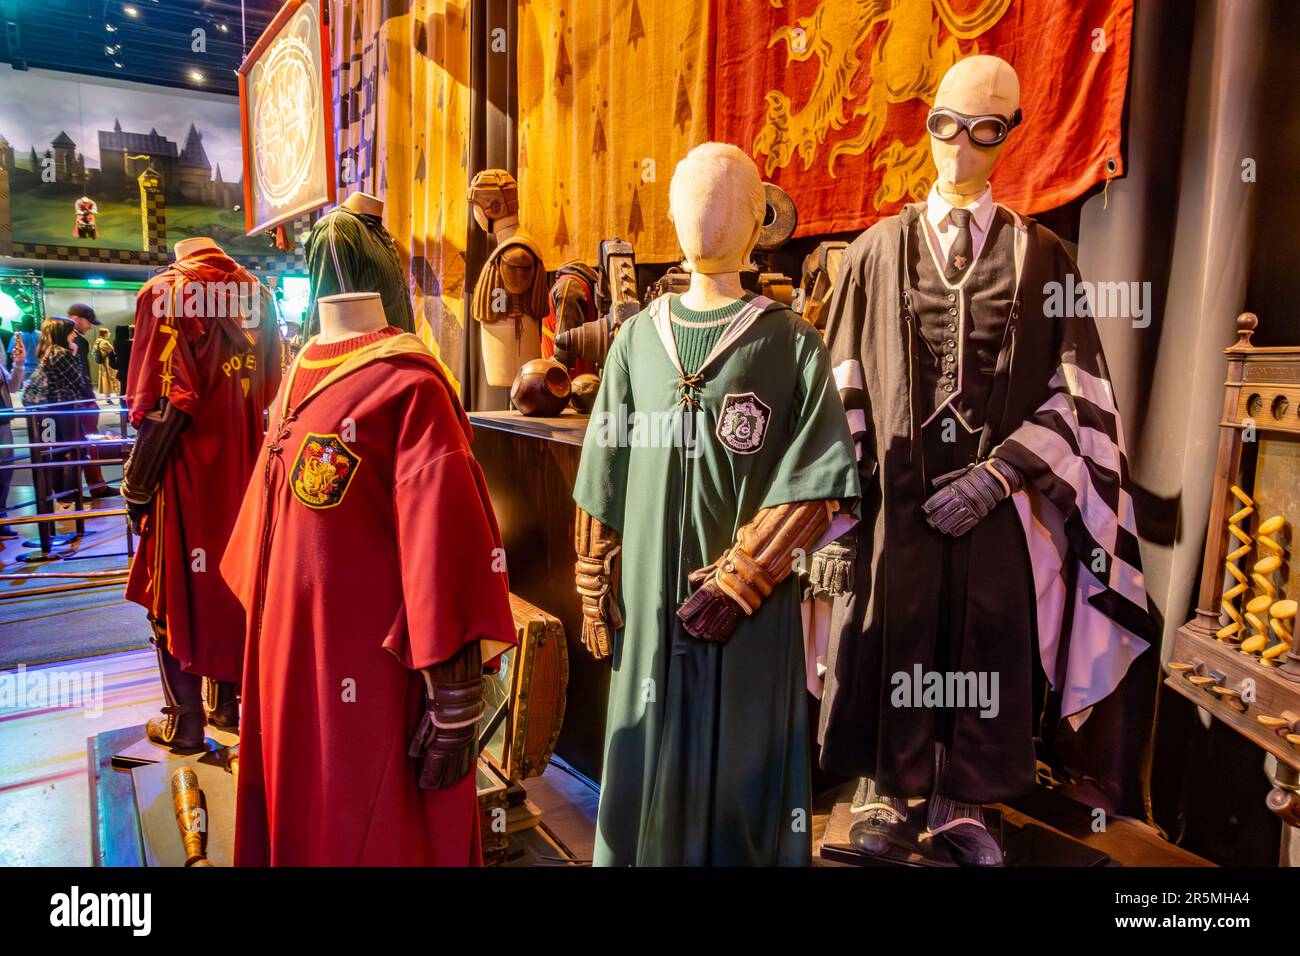 Gryffindor, Slytherin and Ravenclaw quidditch outfits on mannequins on display at The Warner Brothers Harry Potter Tour at Watford, UK Stock Photo